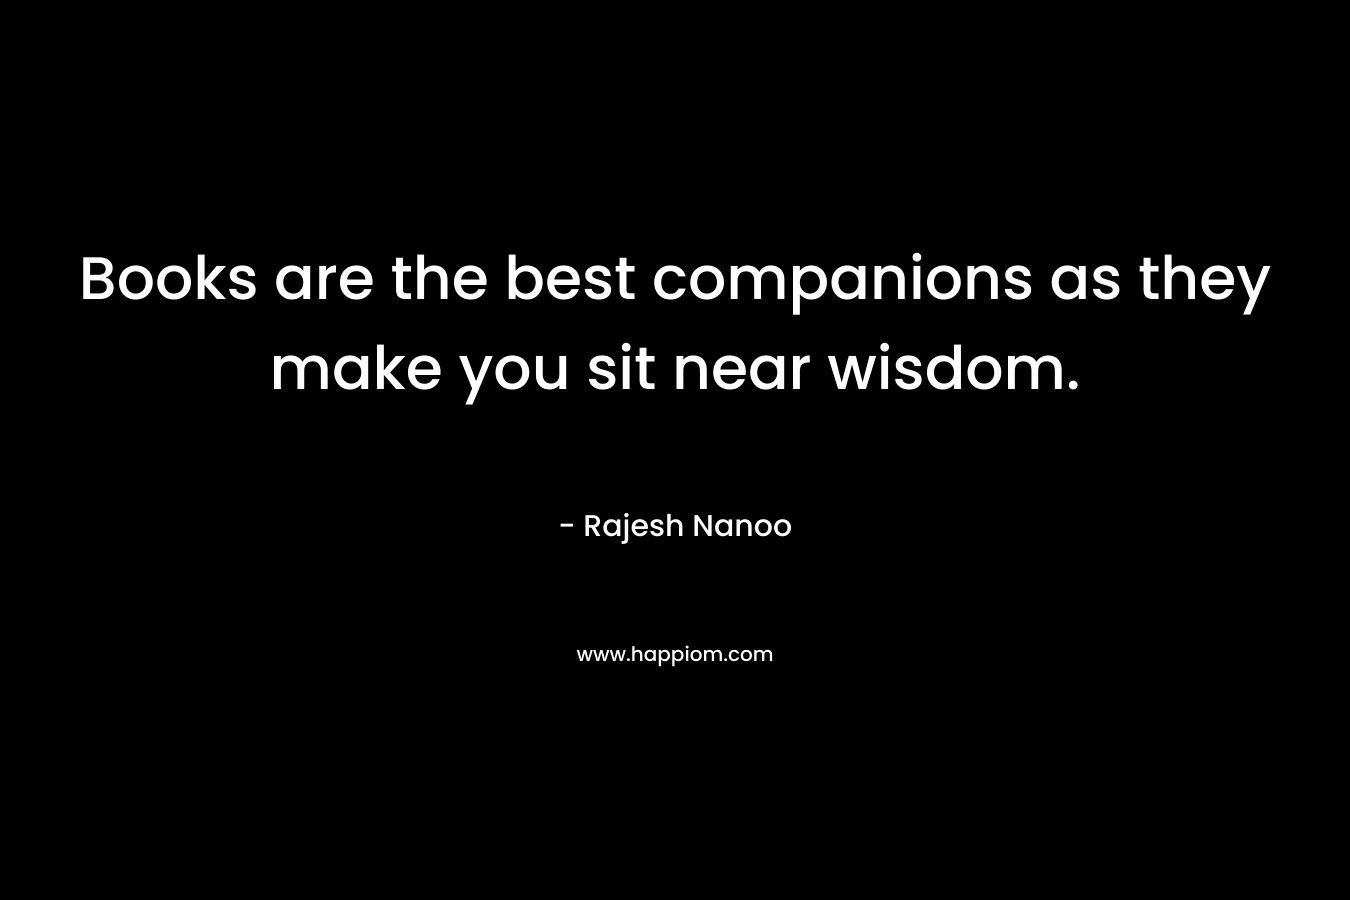 Books are the best companions as they make you sit near wisdom.